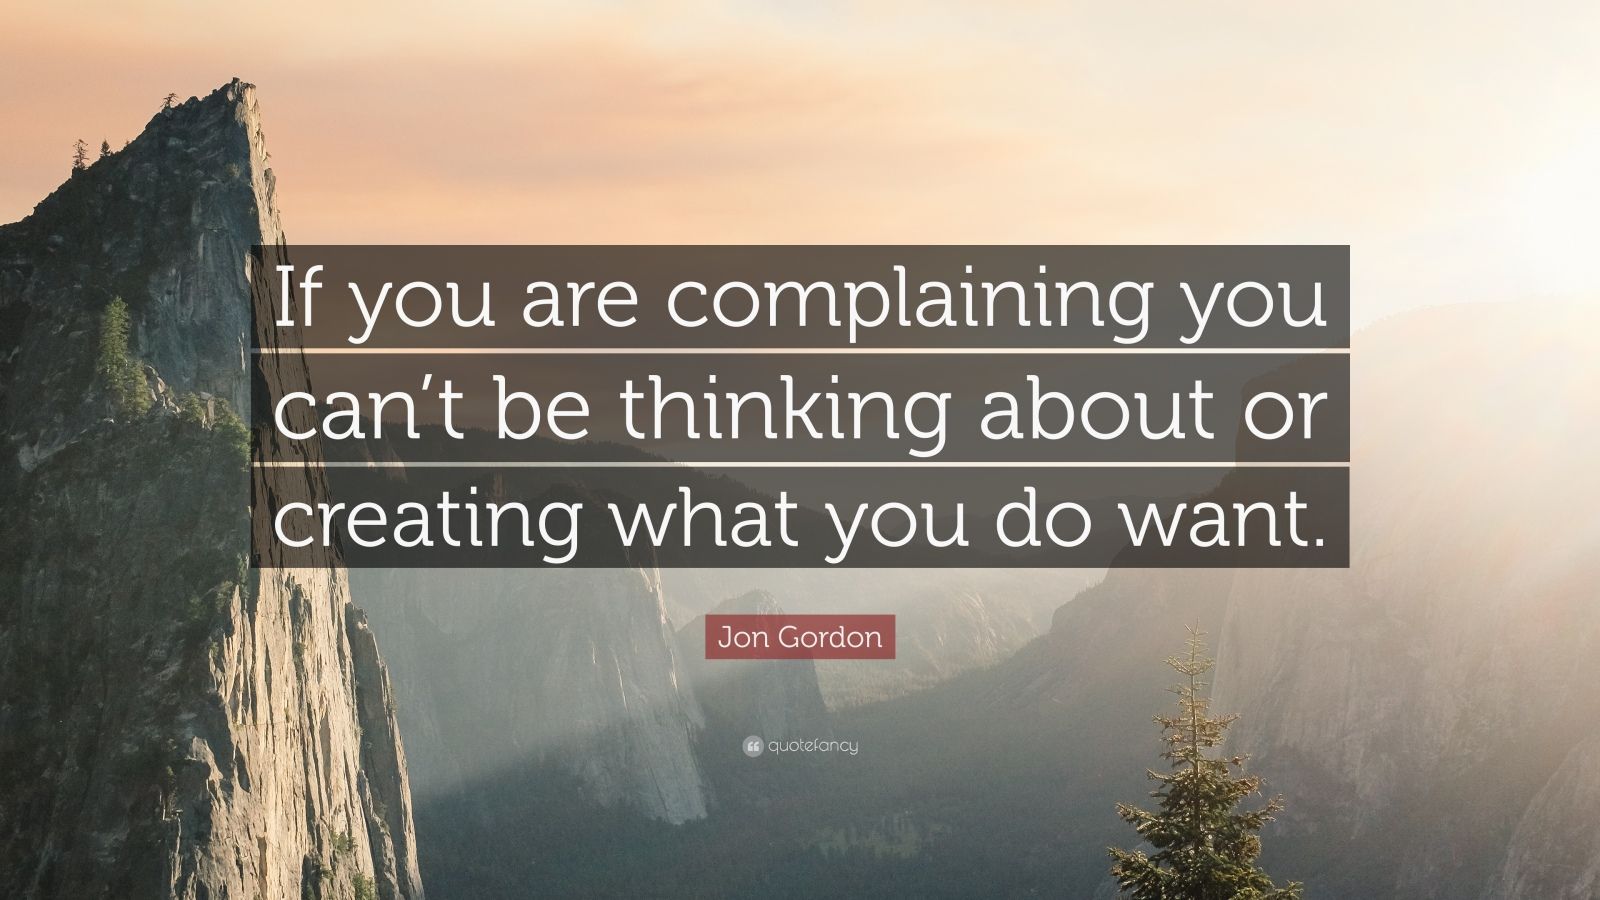 1916922 Jon Gordon Quote If you are complaining you can t be thinking